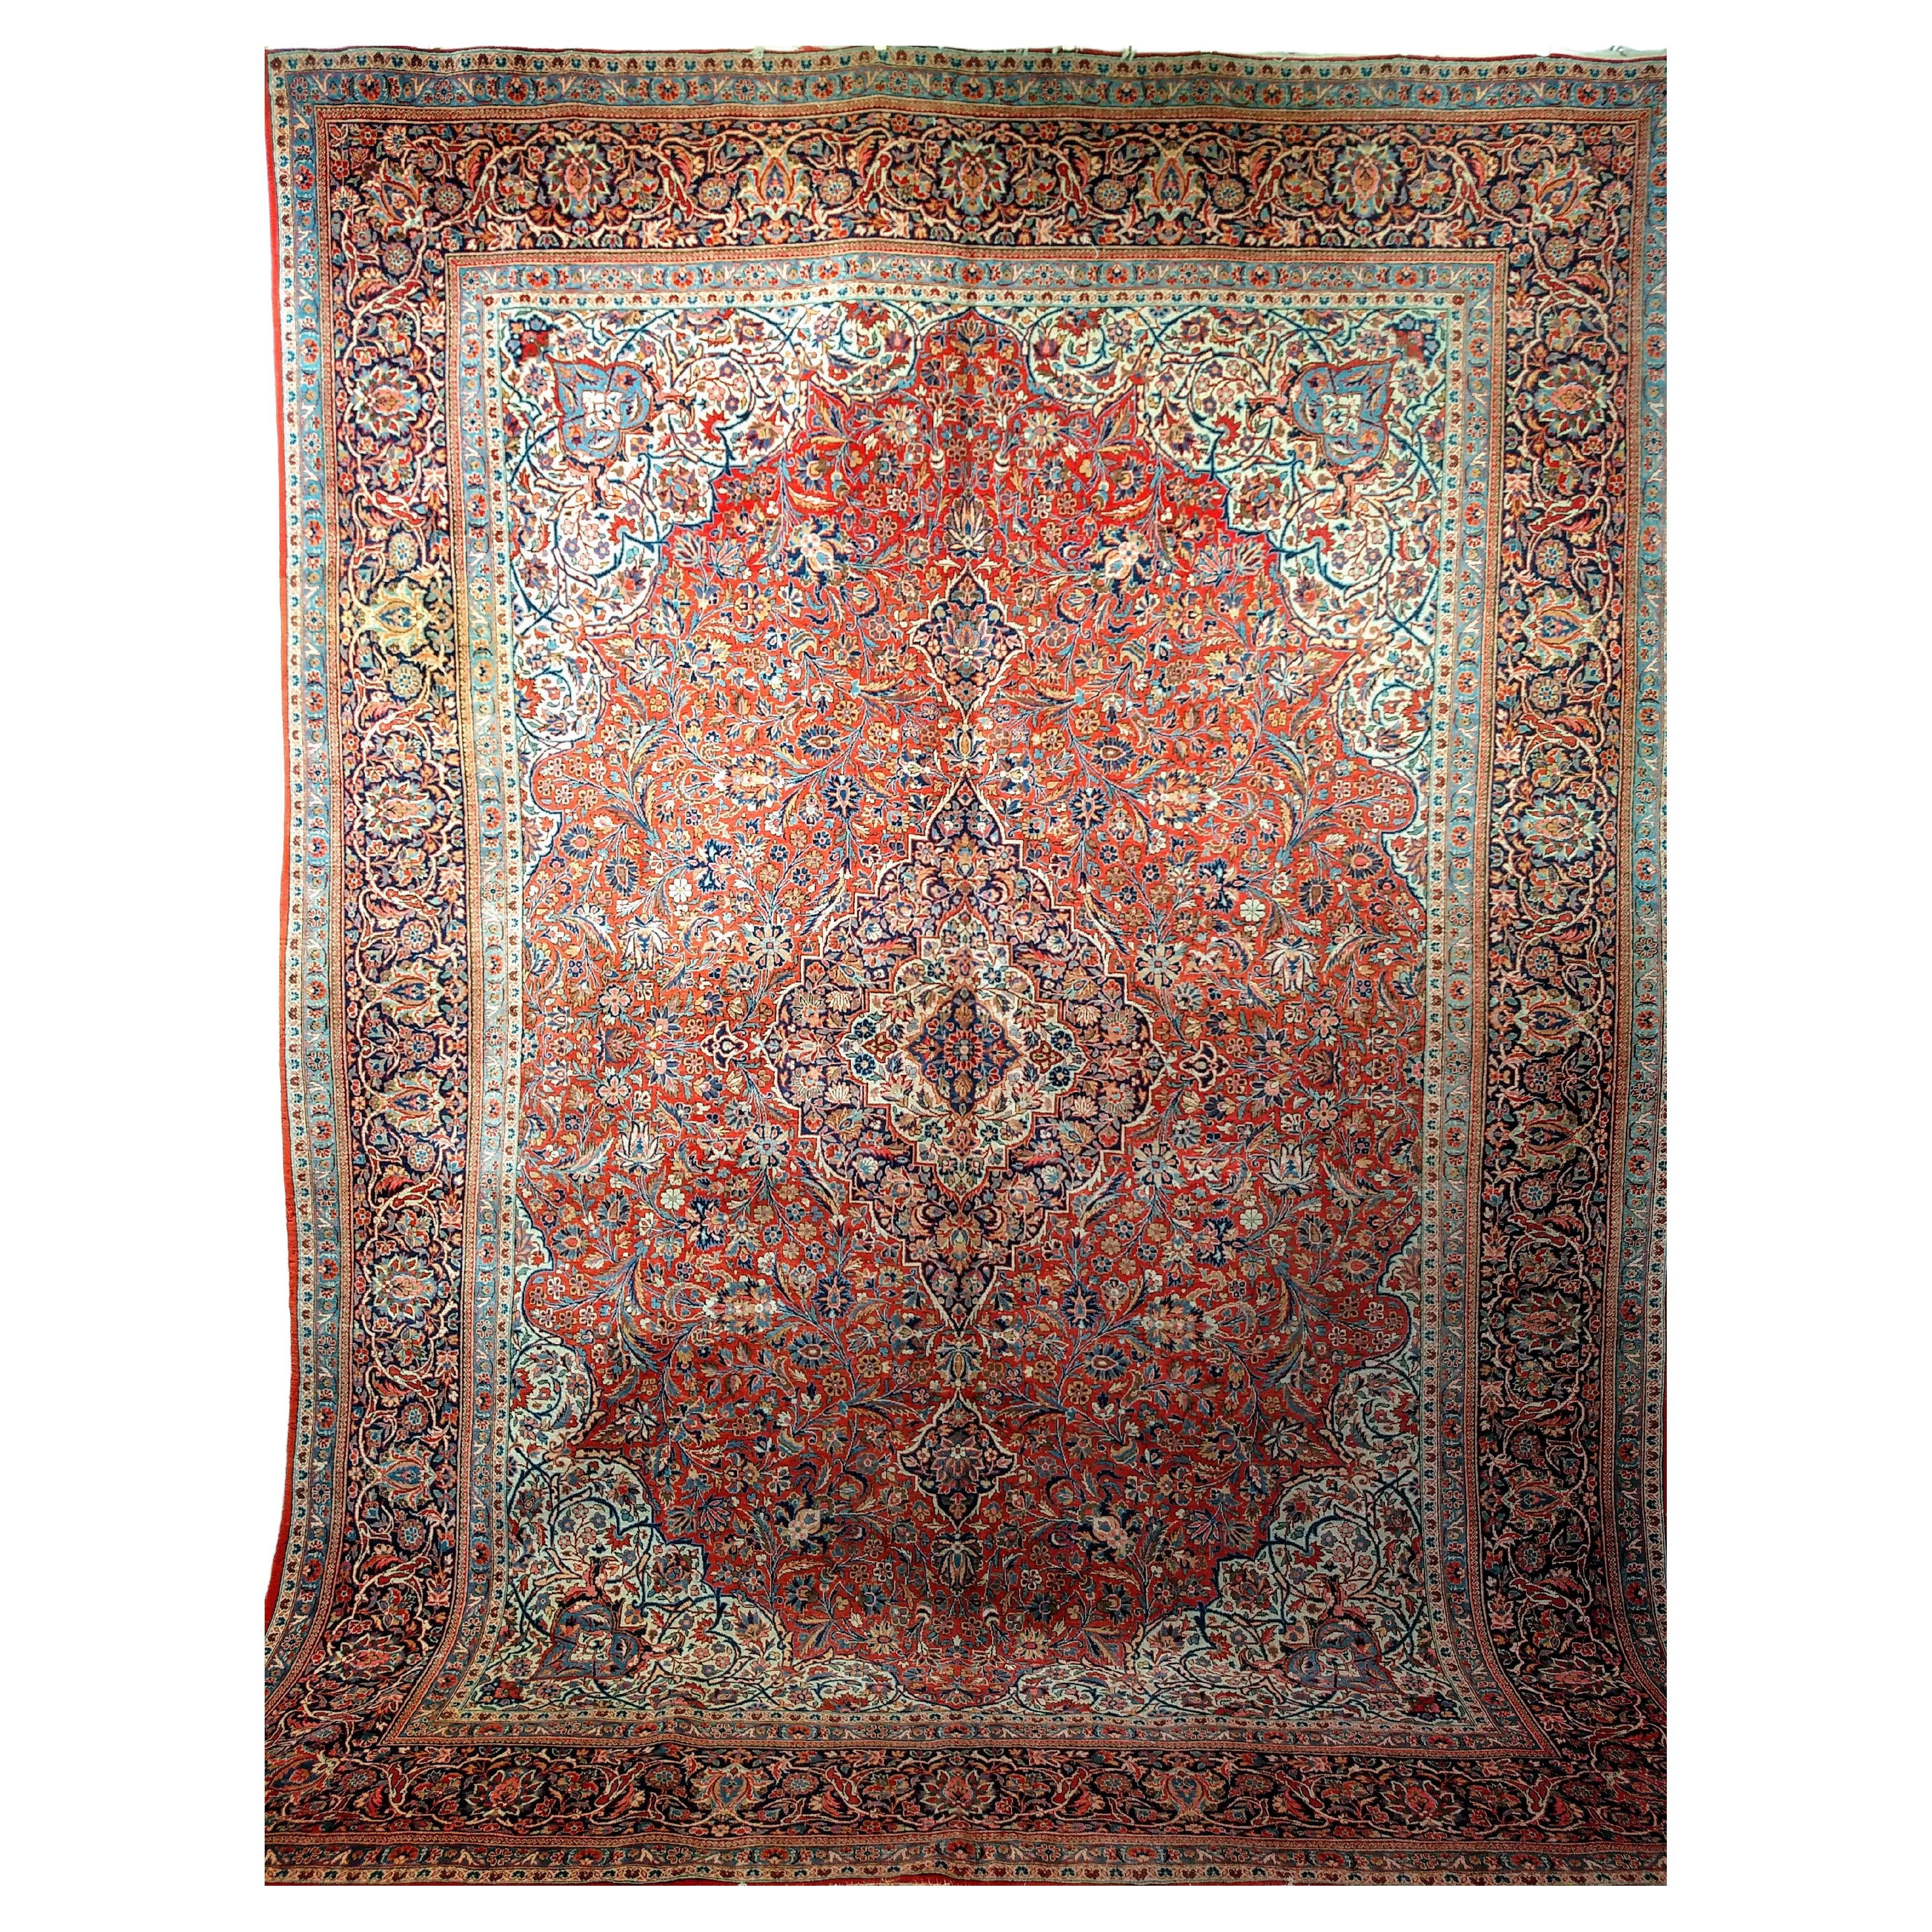 Early 20th Century Persian Kashan in a Floral Pattern in Red, Ivory, French Blue